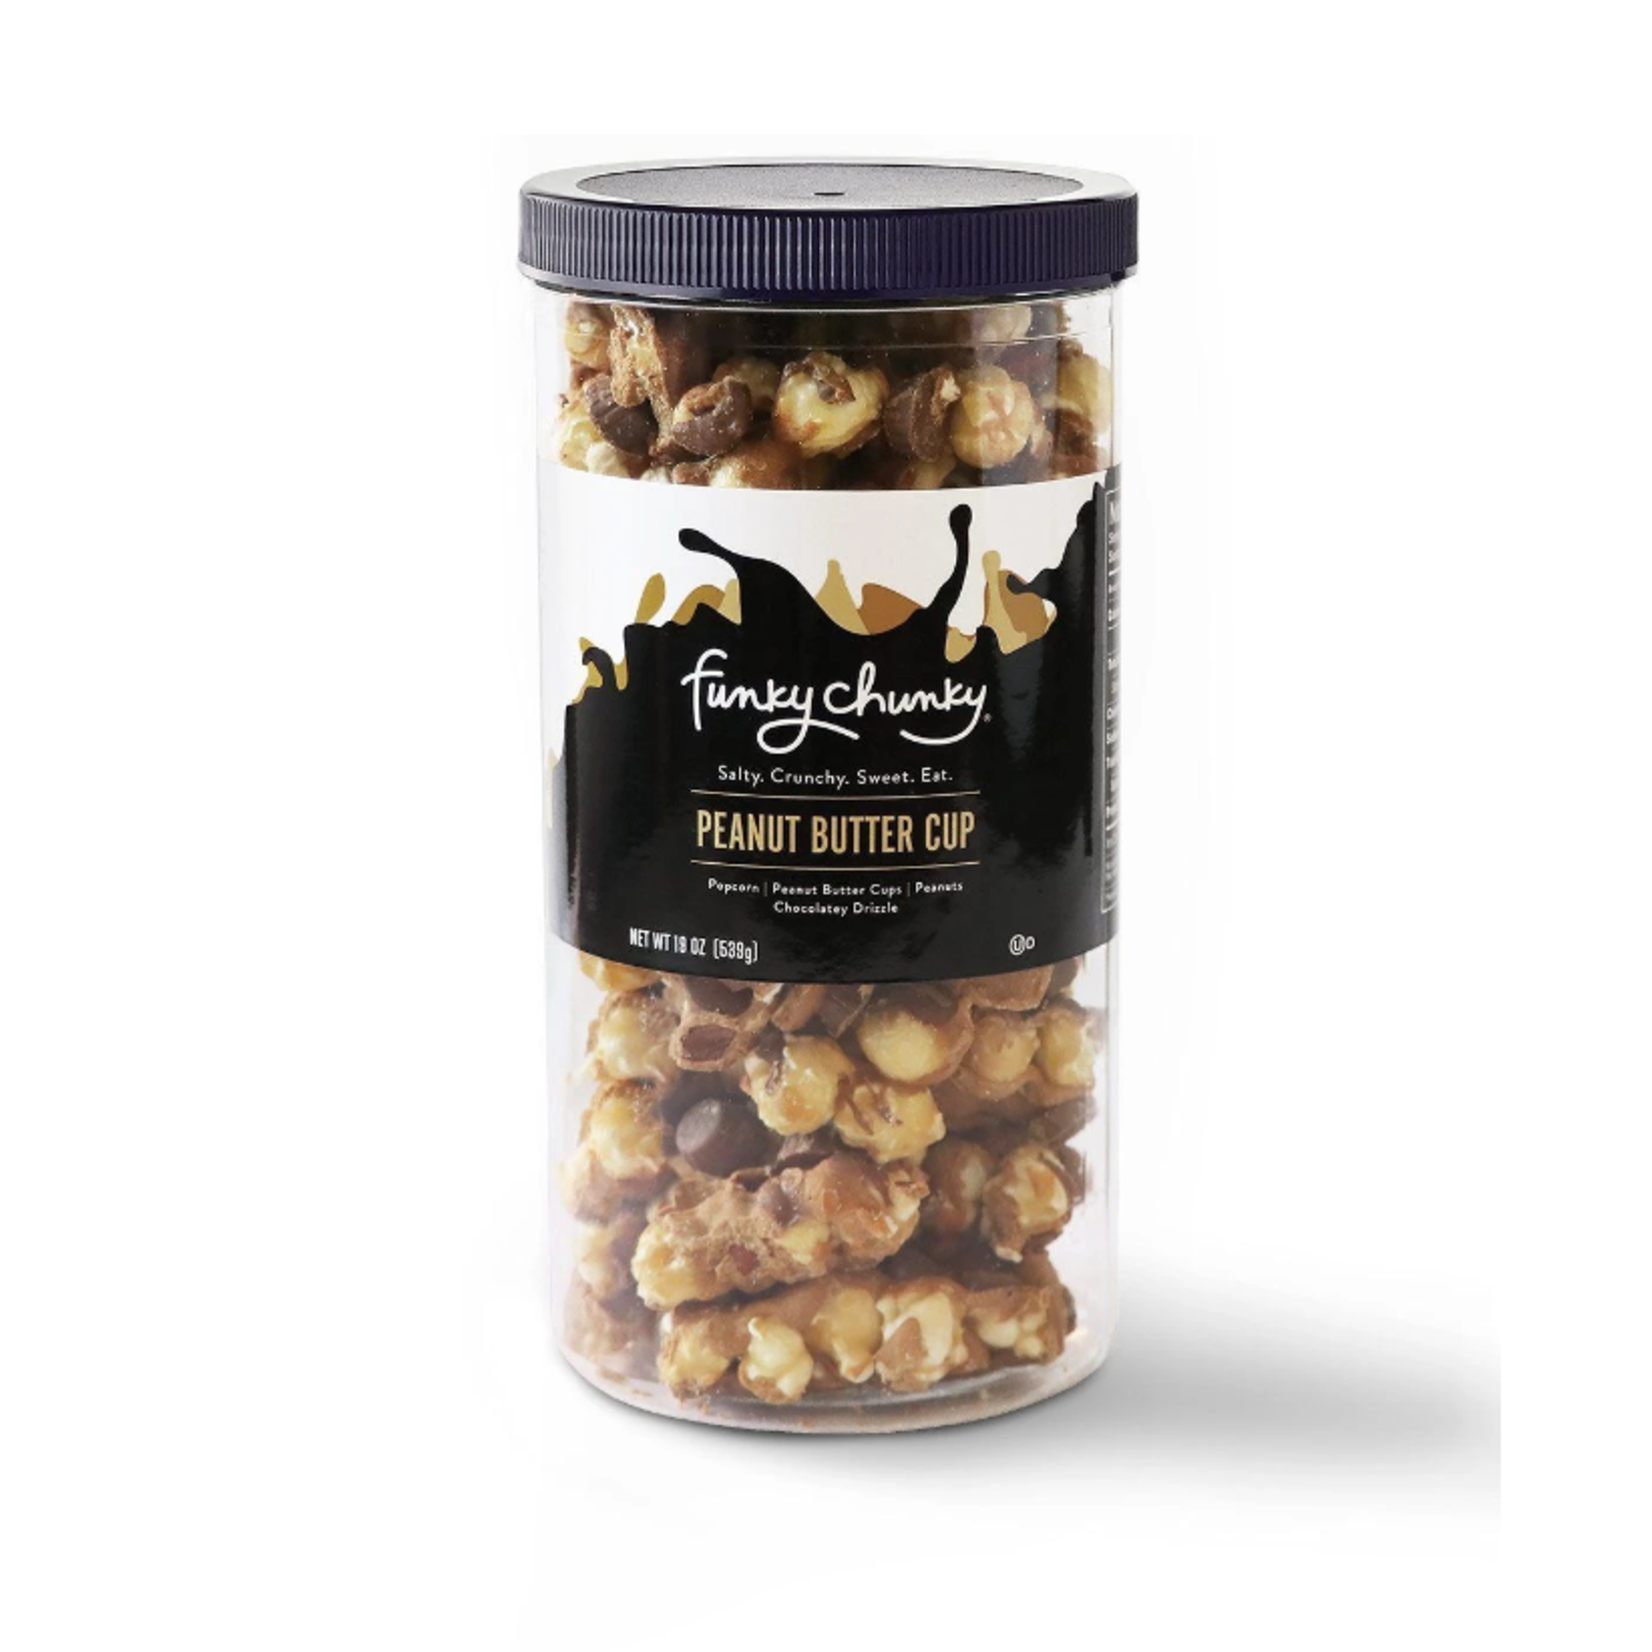 Funky Chunky Peanut Butter Cup Popcorn, Tall Canister